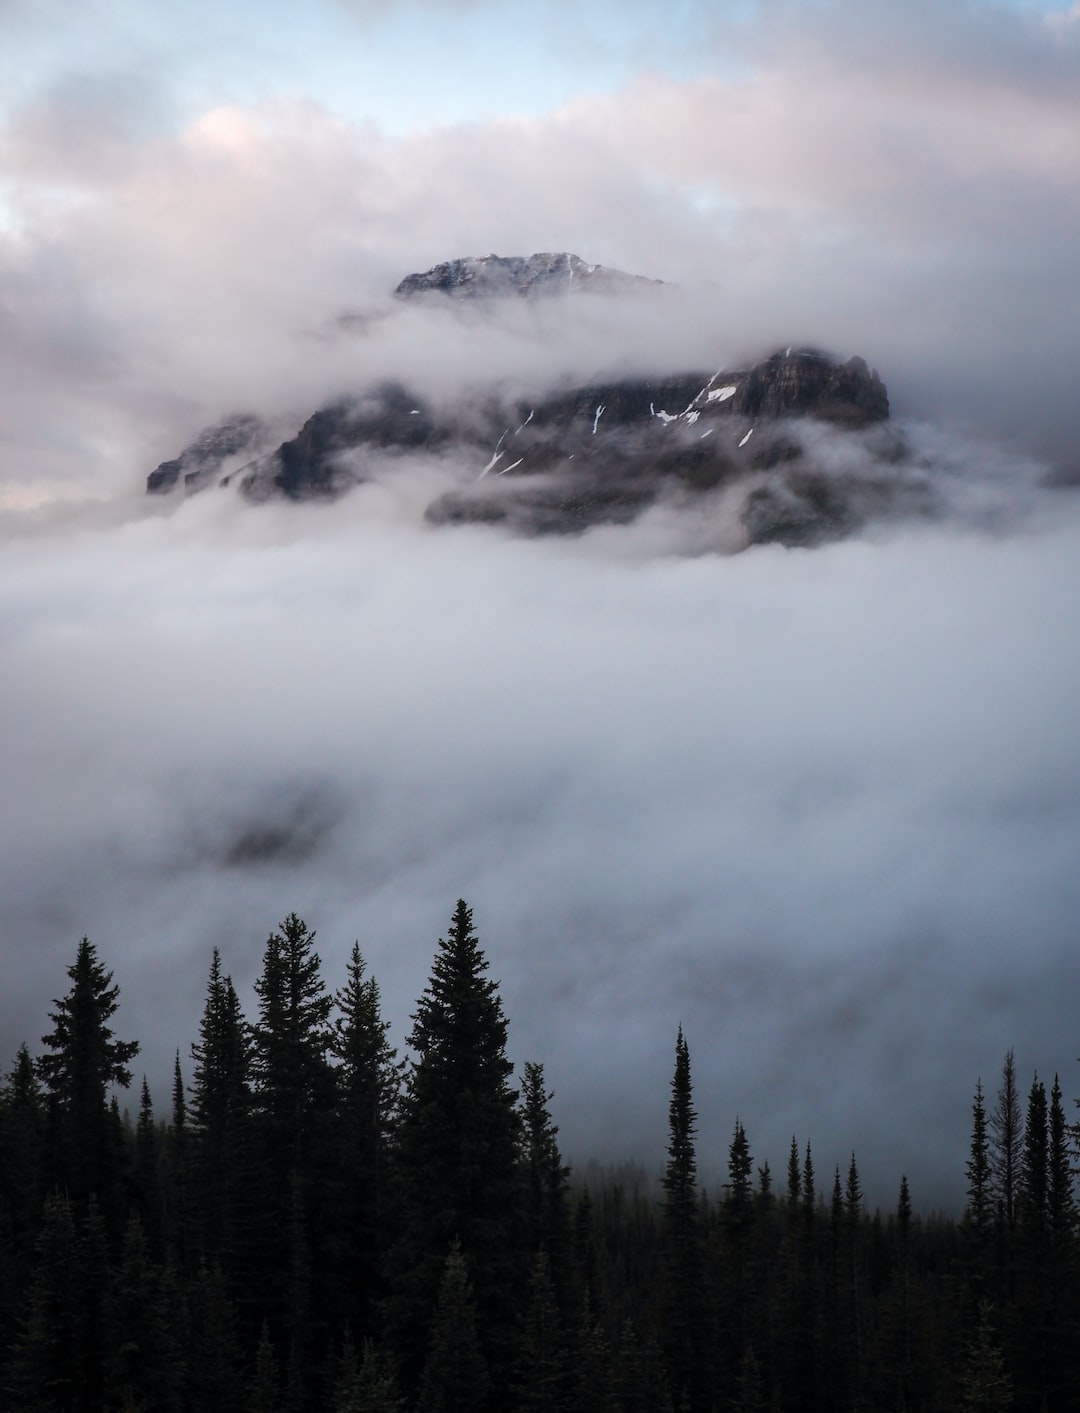 Remnant clouds from the previous night's storm in Banff, Alberta, Canada.